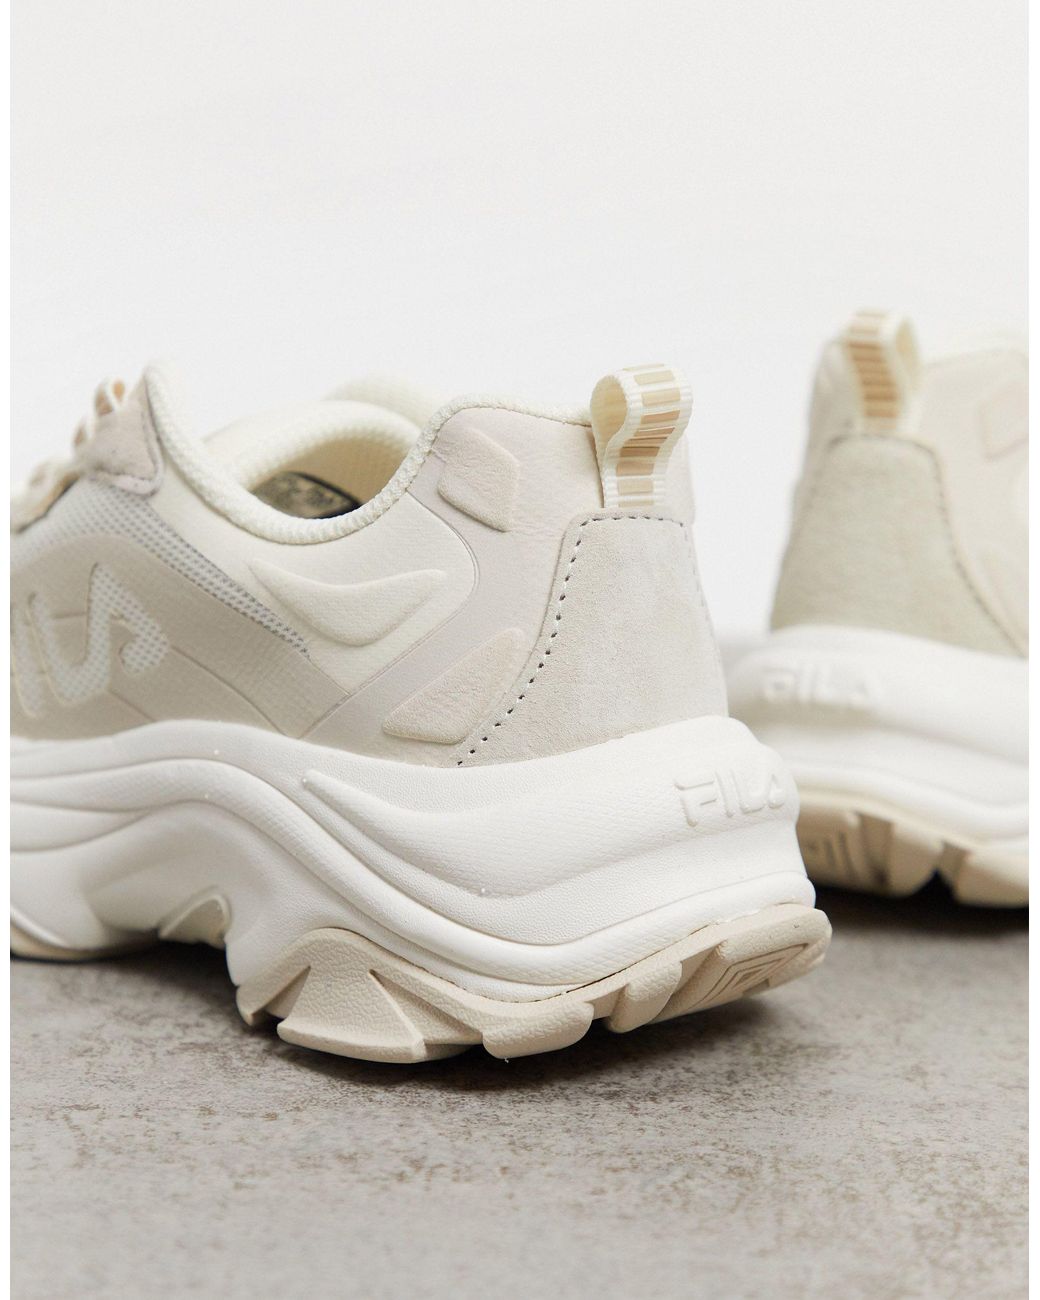 Fila Alpha Ray Linear sneakers in off white